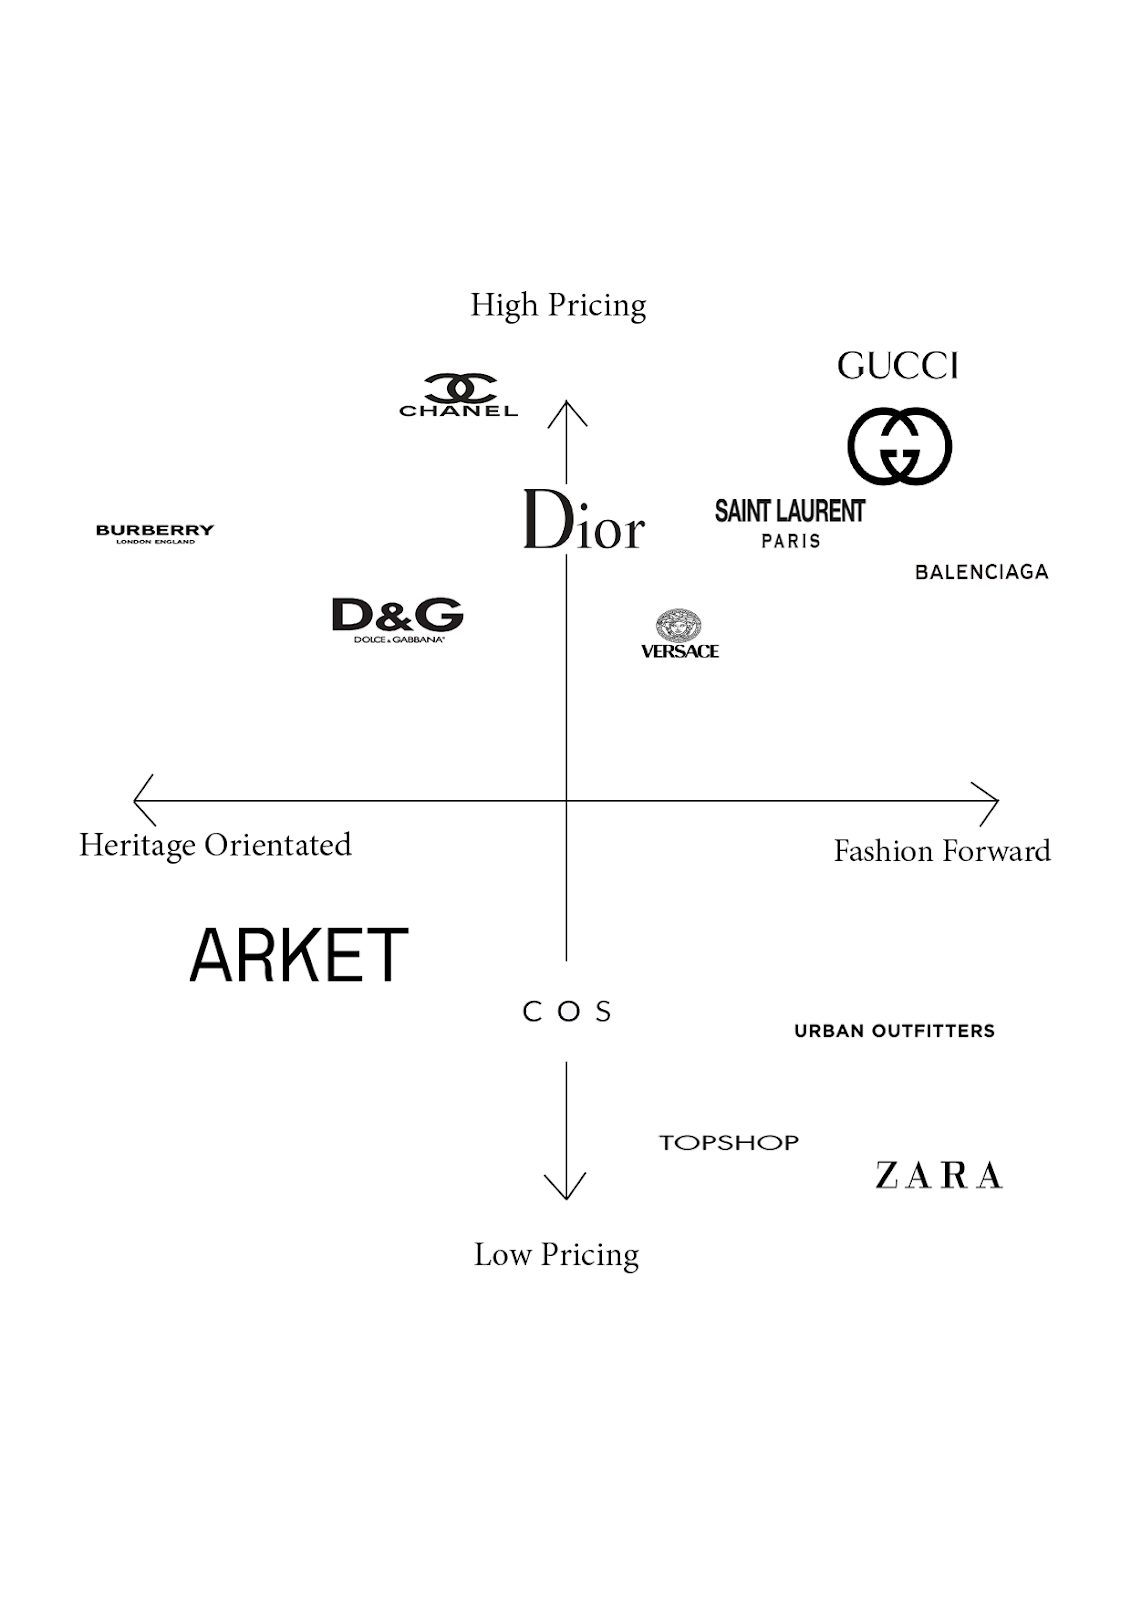 Updated Brand Positioning Map